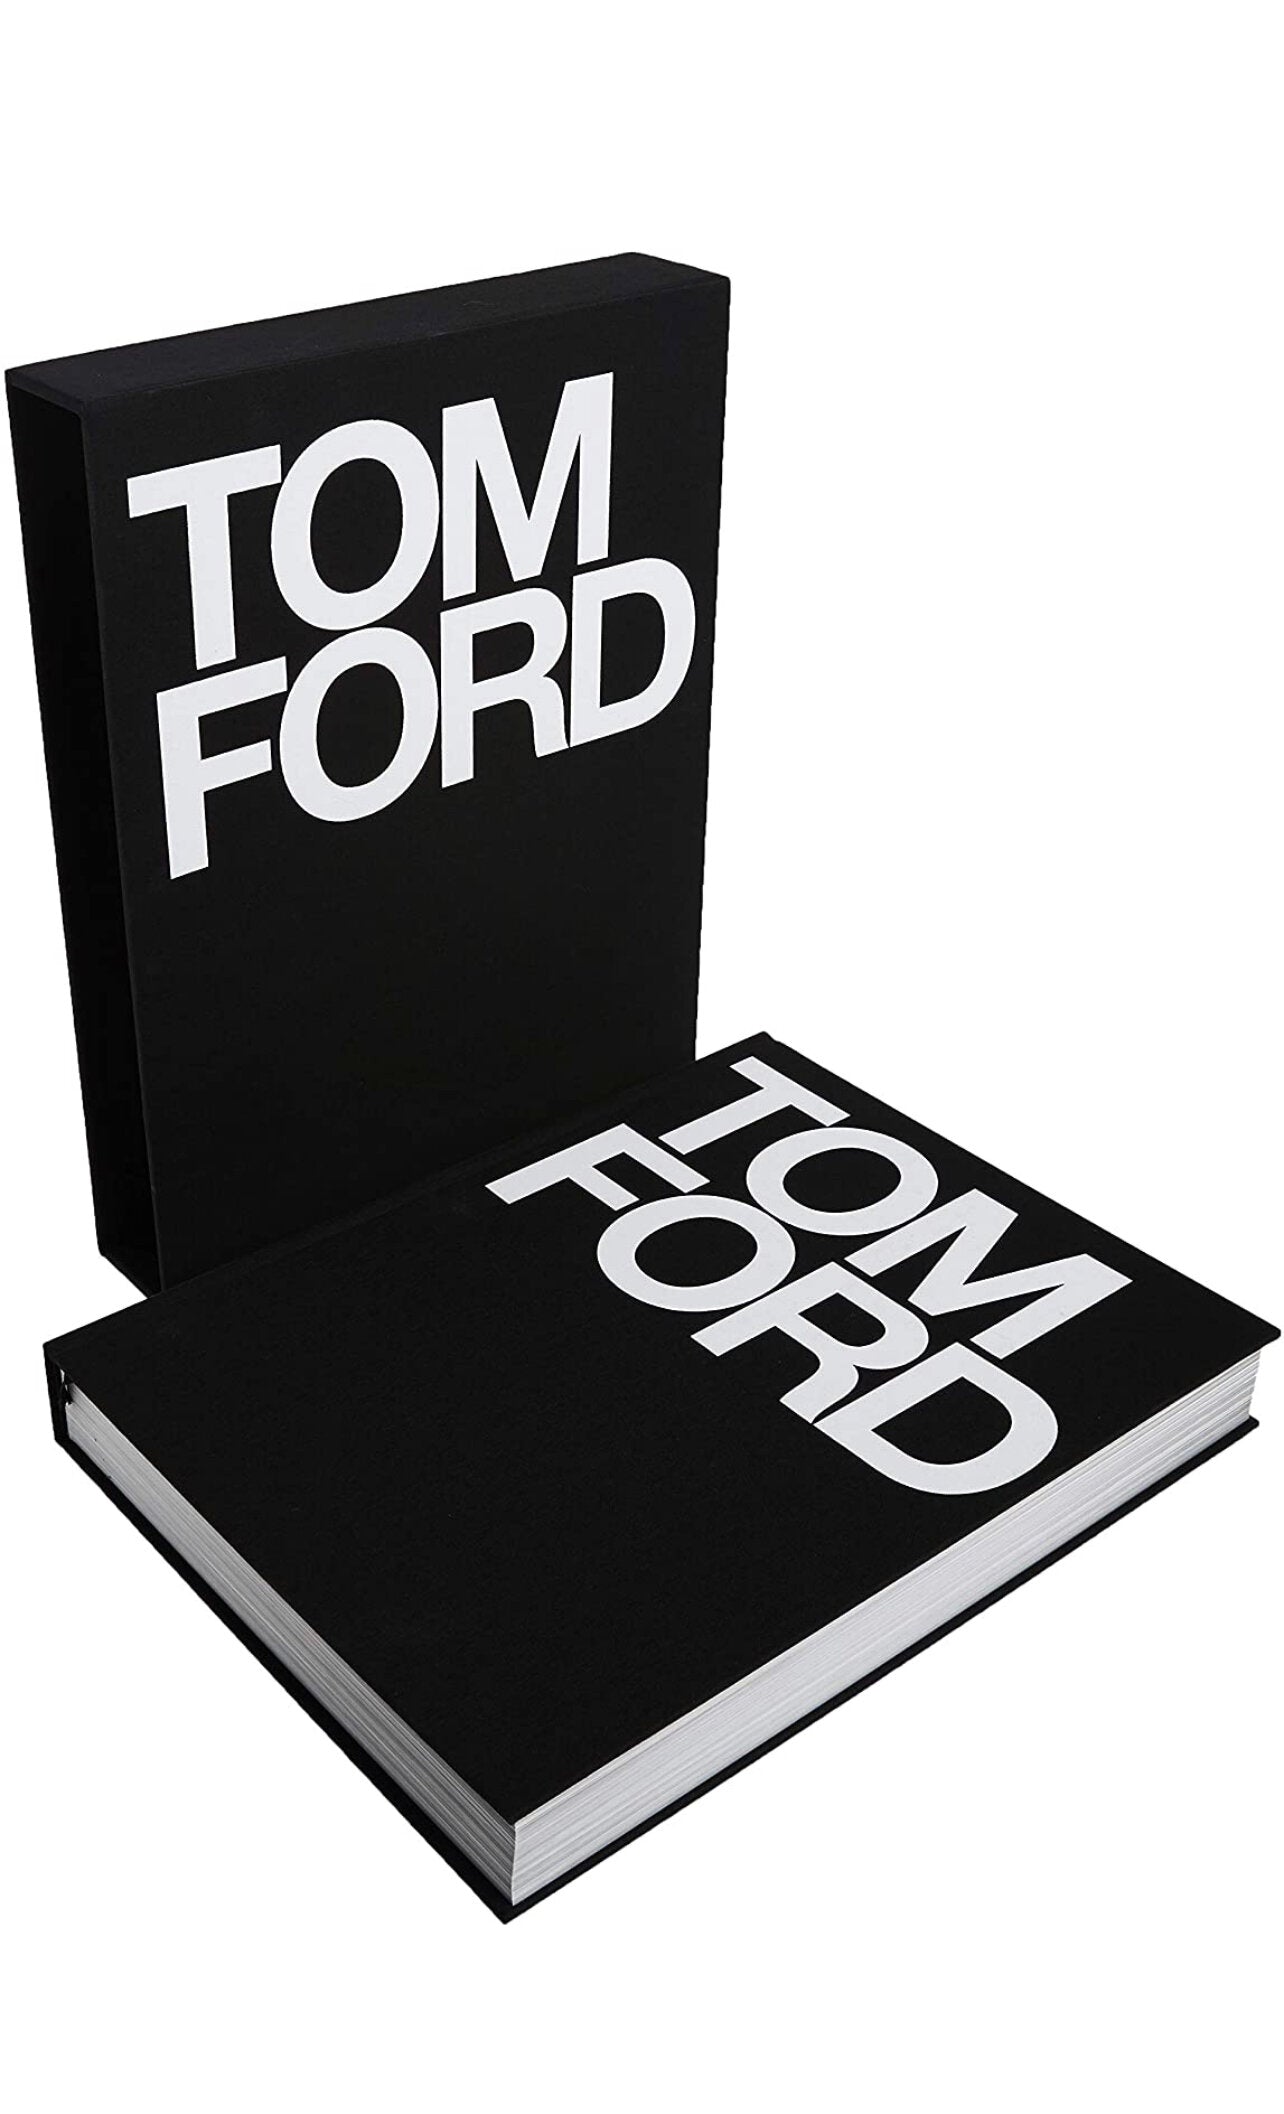 Tom Ford 01 – Coffee Table Books Store